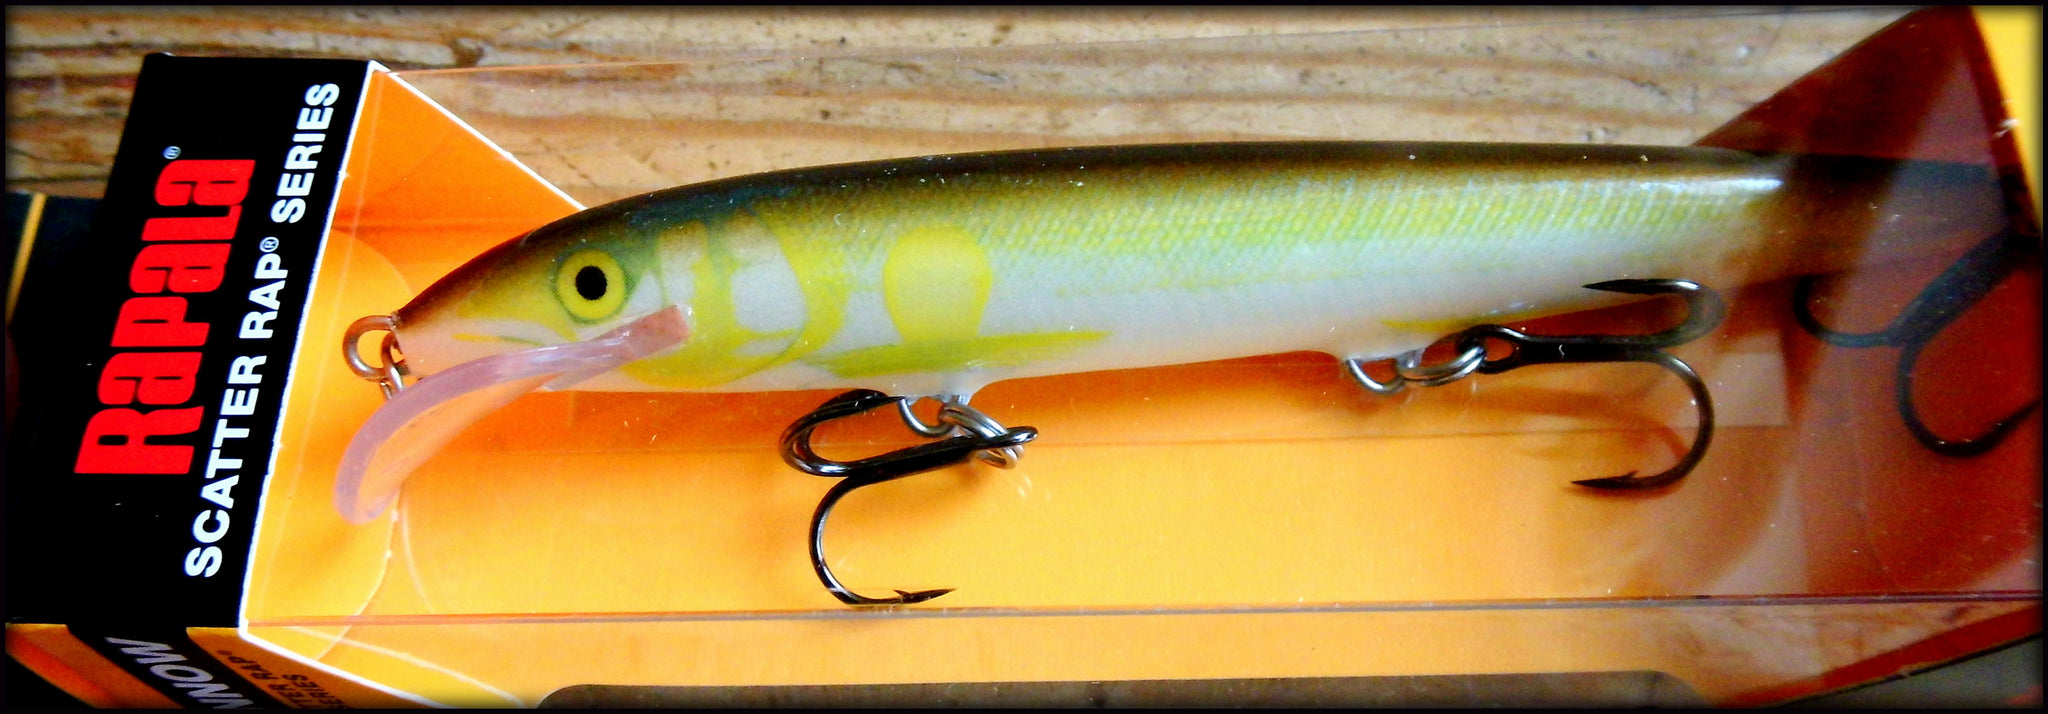 RAPALA SCATTER RAP MINNOW SCRM 11 cm AYU color – Darkagelures